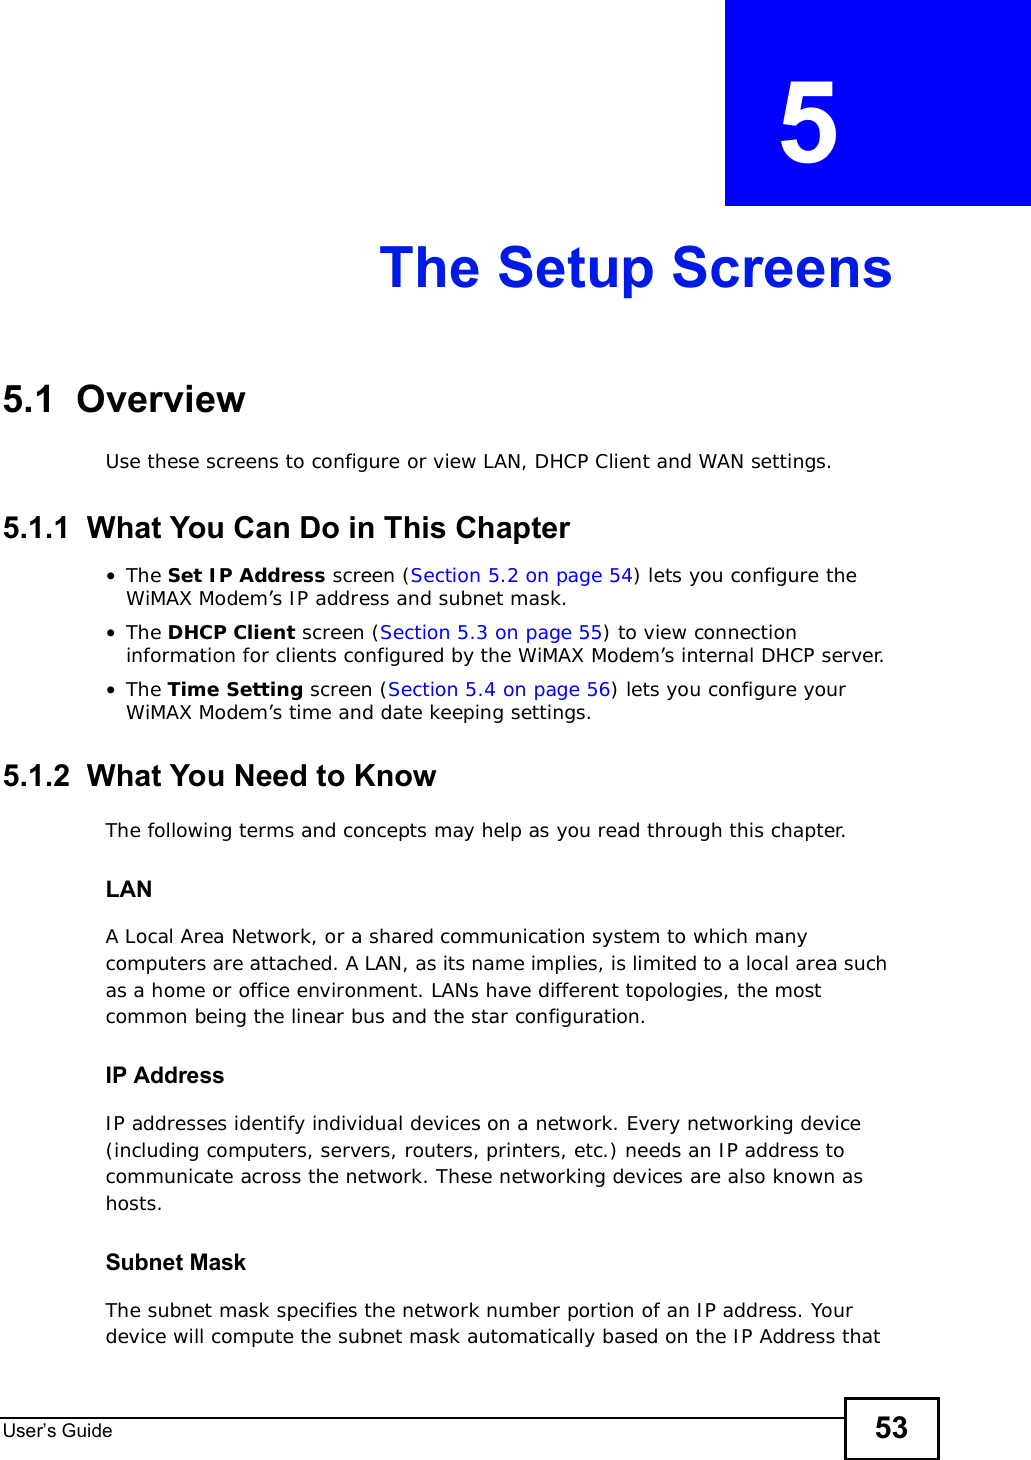 User s Guide 53CHAPTER  5 The Setup Screens5.1  OverviewUse these screens to configure or view LAN, DHCP Client and WAN settings.5.1.1  What You Can Do in This Chapter•The Set IP Address screen (Section 5.2 on page 54) lets you configure the WiMAX Modem’s IP address and subnet mask.•The DHCP Client screen (Section 5.3 on page 55) to view connection information for clients configured by the WiMAX Modem’s internal DHCP server.•The Time Setting screen (Section 5.4 on page 56) lets you configure your WiMAX Modem’s time and date keeping settings.5.1.2  What You Need to KnowThe following terms and concepts may help as you read through this chapter.LANA Local Area Network, or a shared communication system to which many computers are attached. A LAN, as its name implies, is limited to a local area such as a home or office environment. LANs have different topologies, the most common being the linear bus and the star configuration.IP AddressIP addresses identify individual devices on a network. Every networking device (including computers, servers, routers, printers, etc.) needs an IP address to communicate across the network. These networking devices are also known as hosts.Subnet MaskThe subnet mask specifies the network number portion of an IP address. Your device will compute the subnet mask automatically based on the IP Address that 